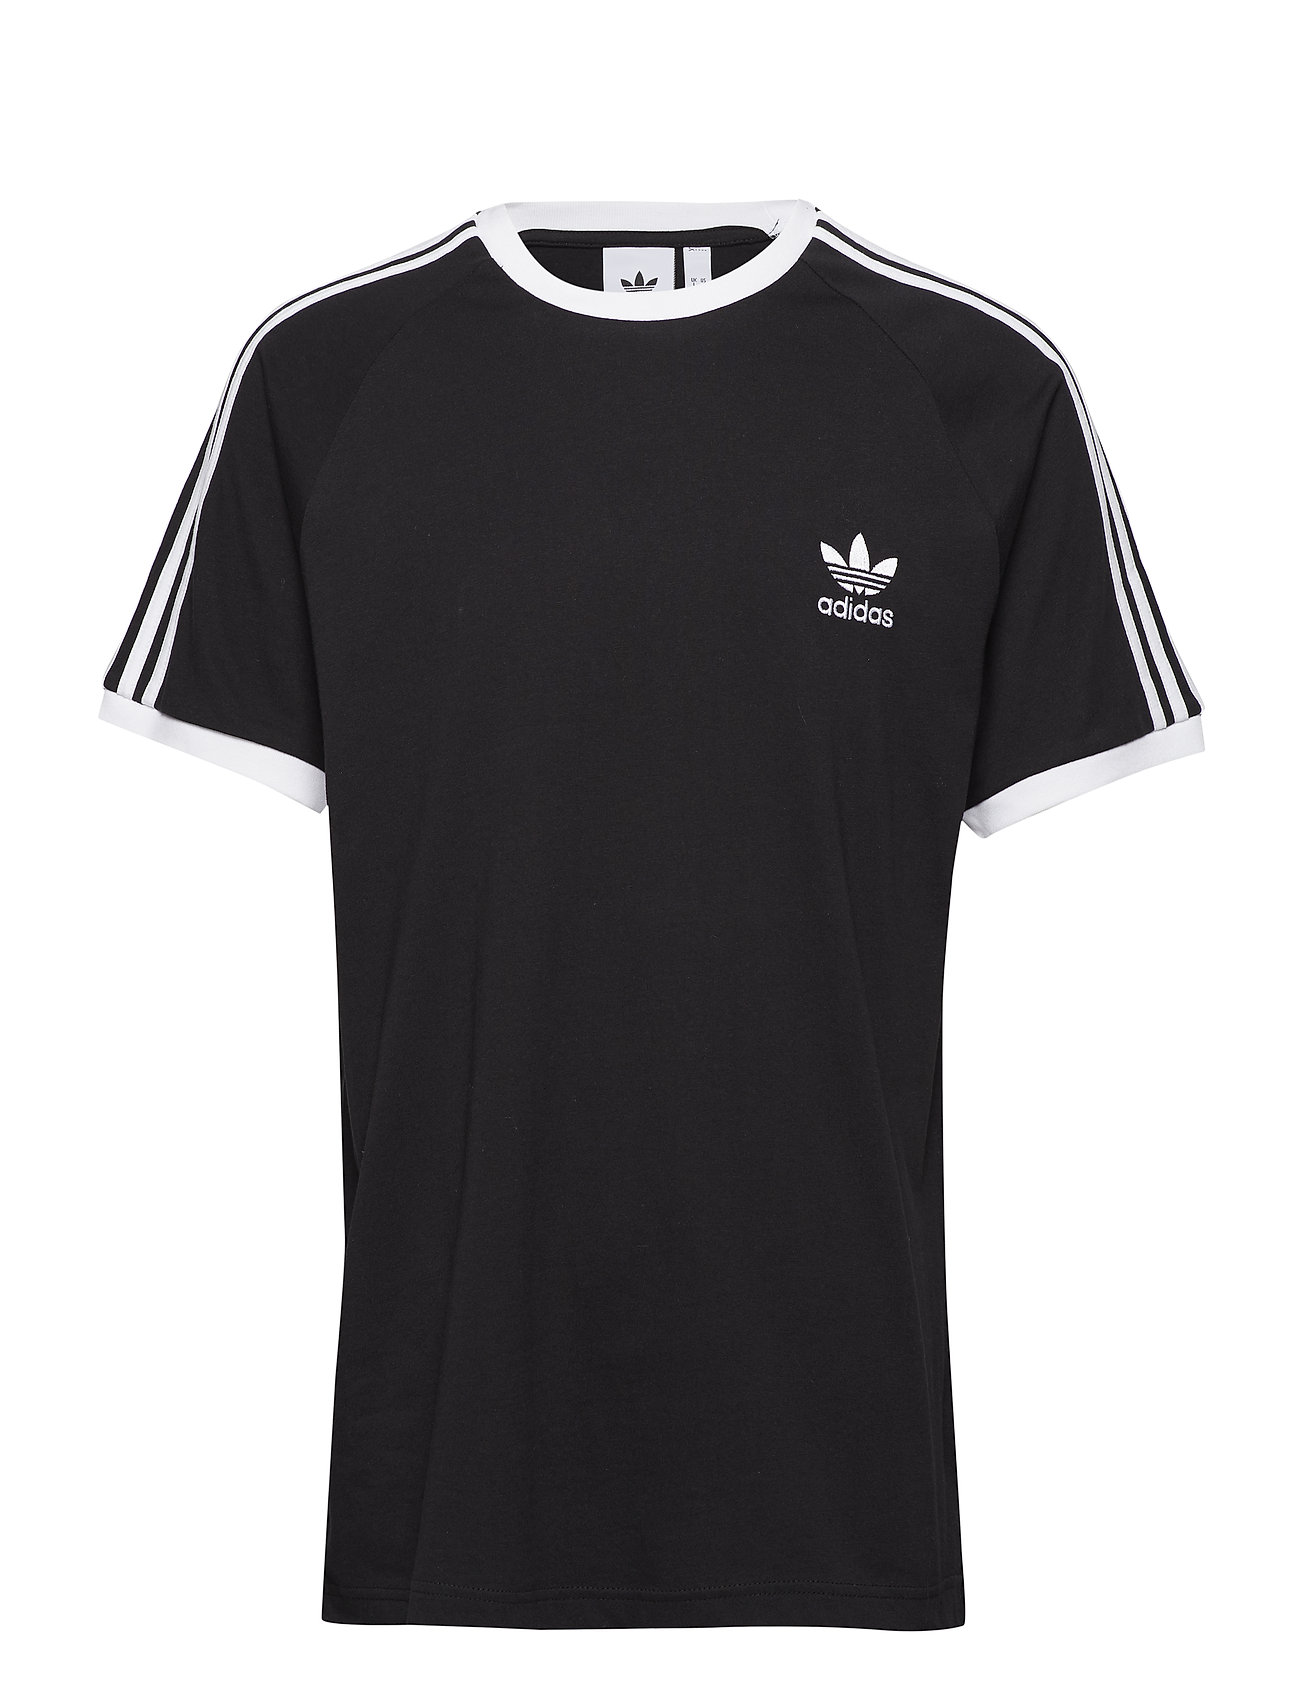 adidas Originals 3-stripes Tee (Black), (20.97 €) | Large selection of  outlet-styles | Booztlet.com